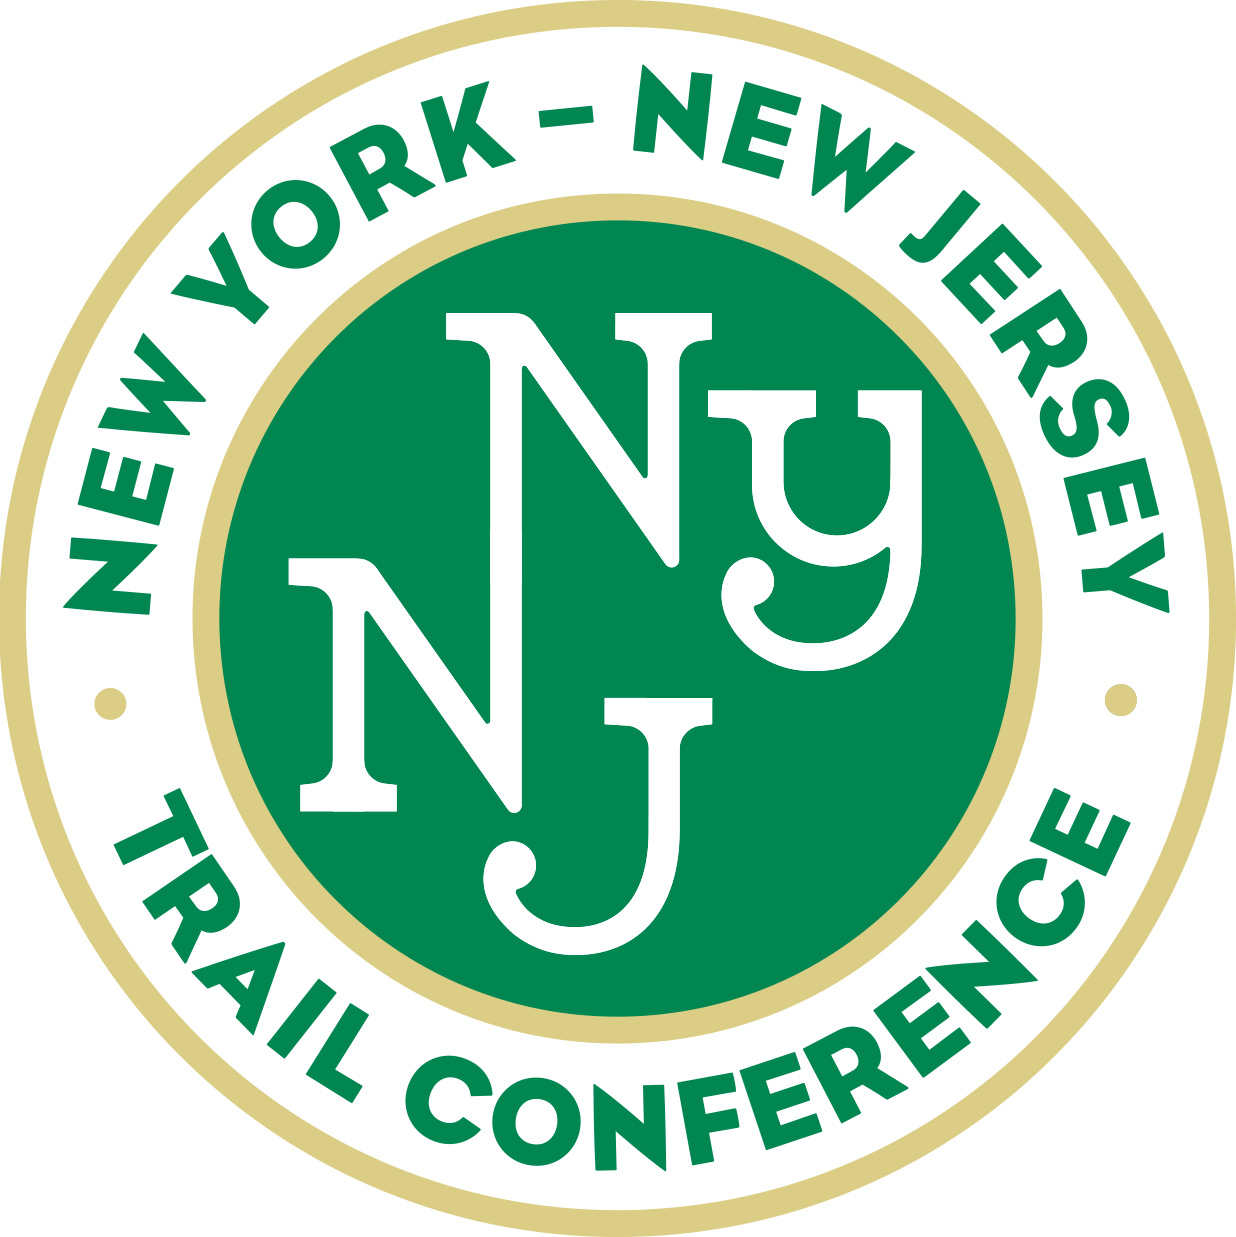 New York-New Jersey Trail Conference logo